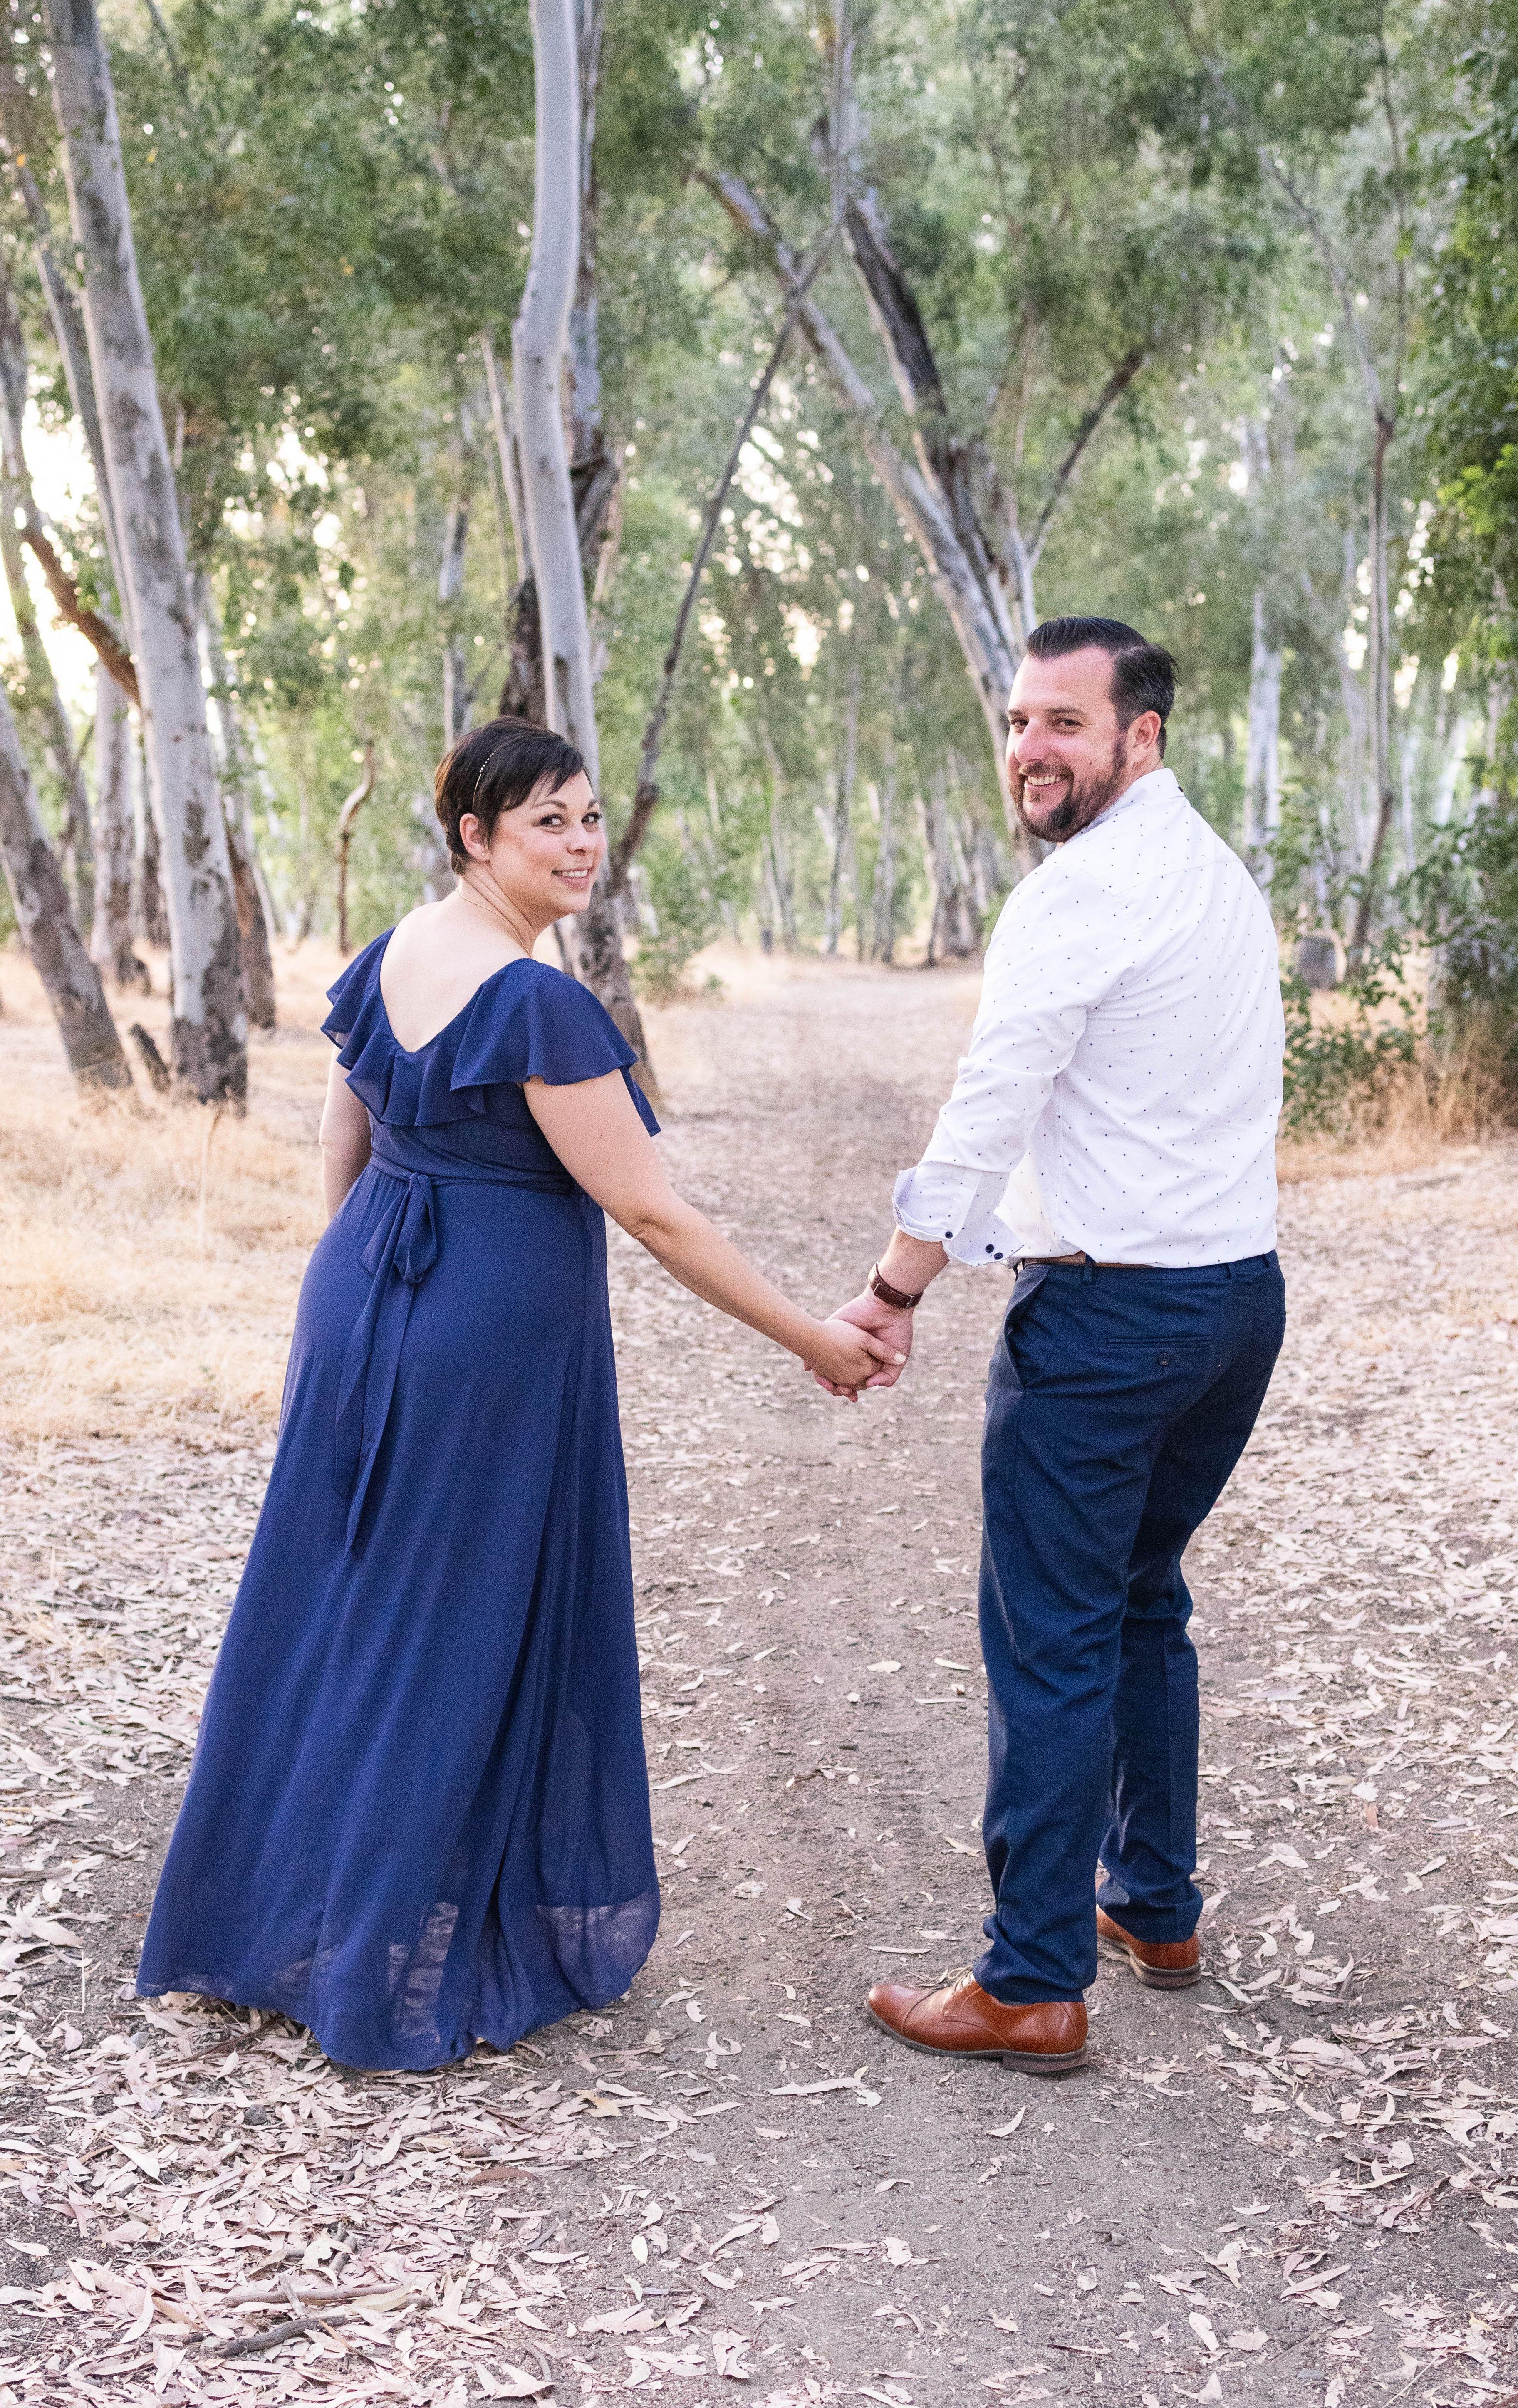 The Wedding Website of Michael Thomas and Stephanie Campos